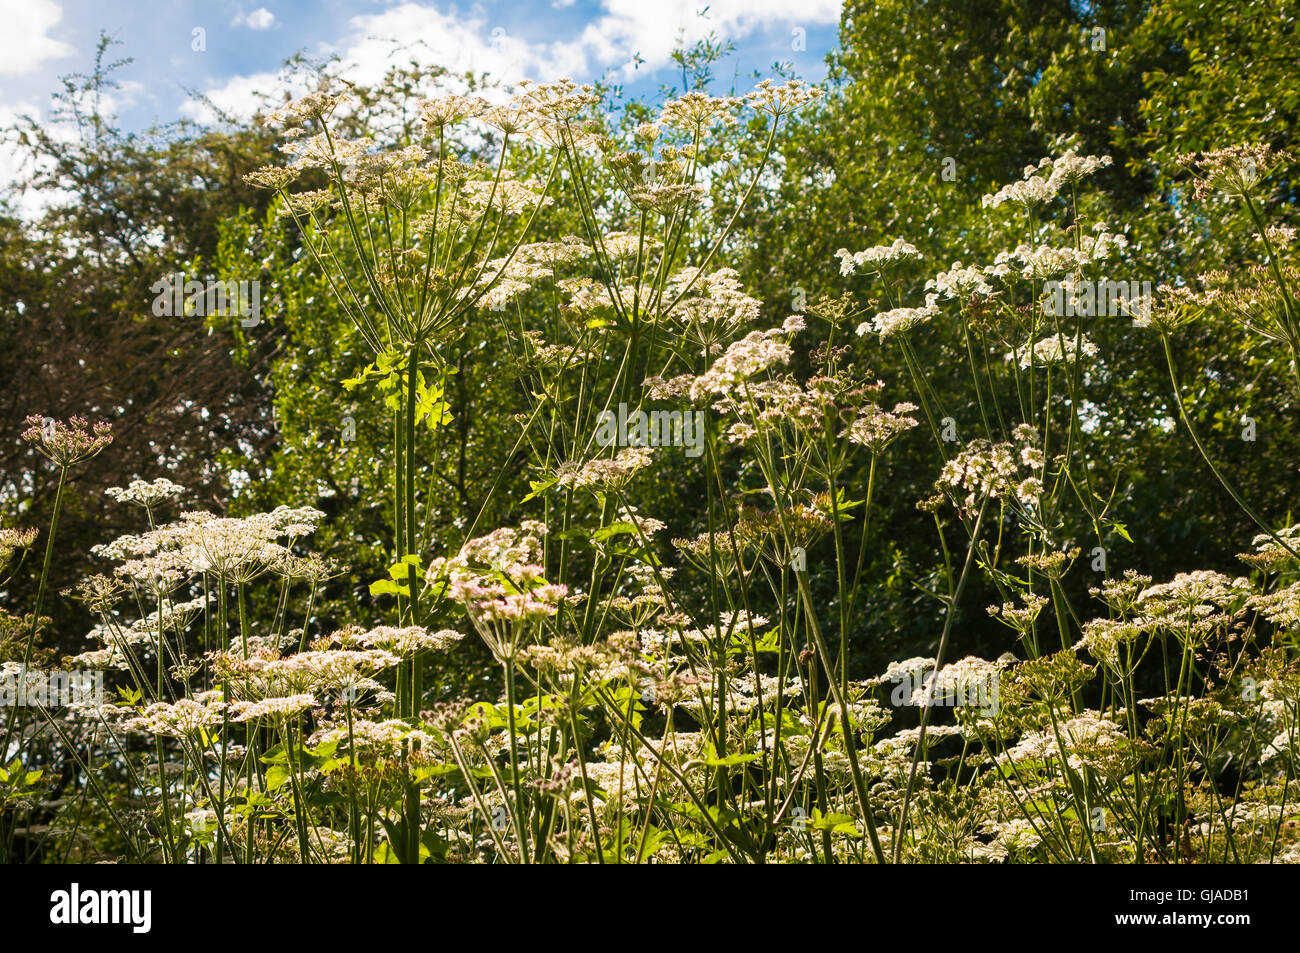 A landscape image of one of the Cow Parsley Family growing alongside a hedge Stock Photo